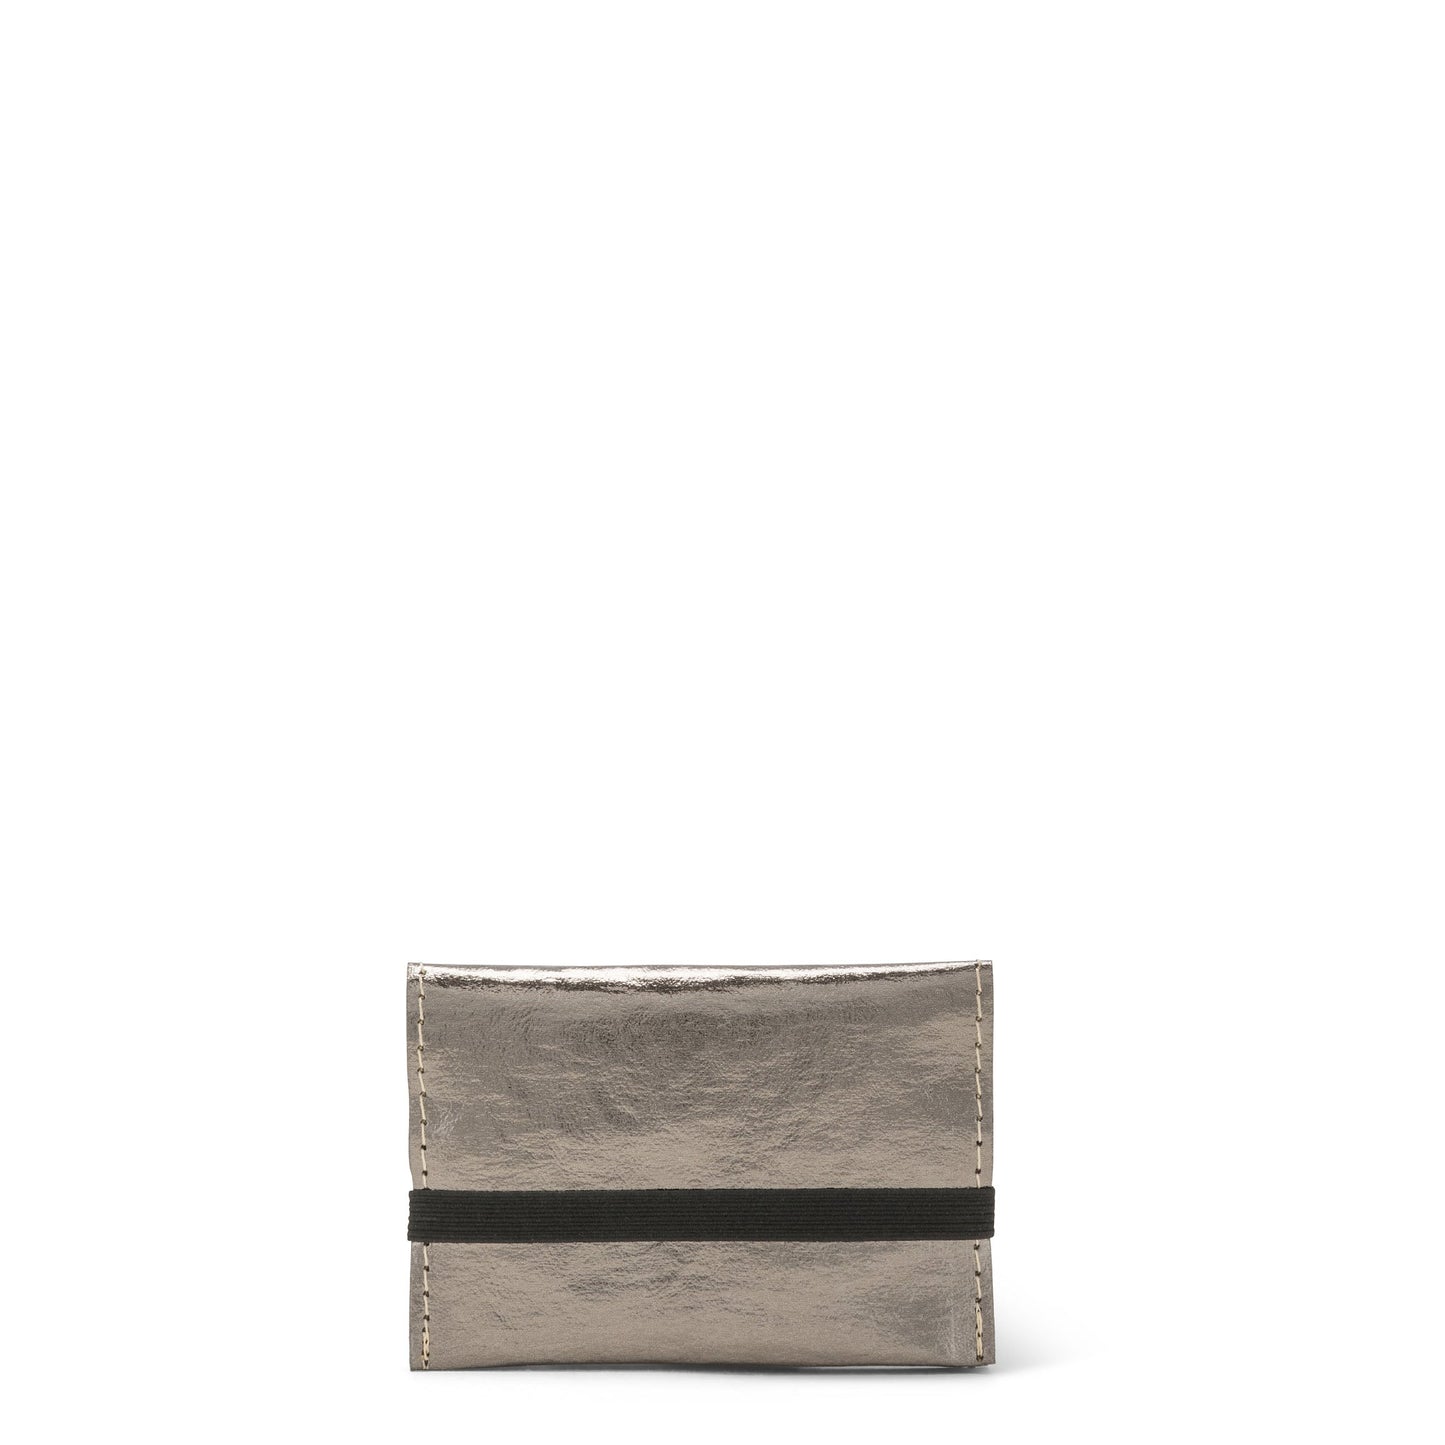 A pewter metallic washable paper card holder is shown from the front, with an elastic strap closure in black.